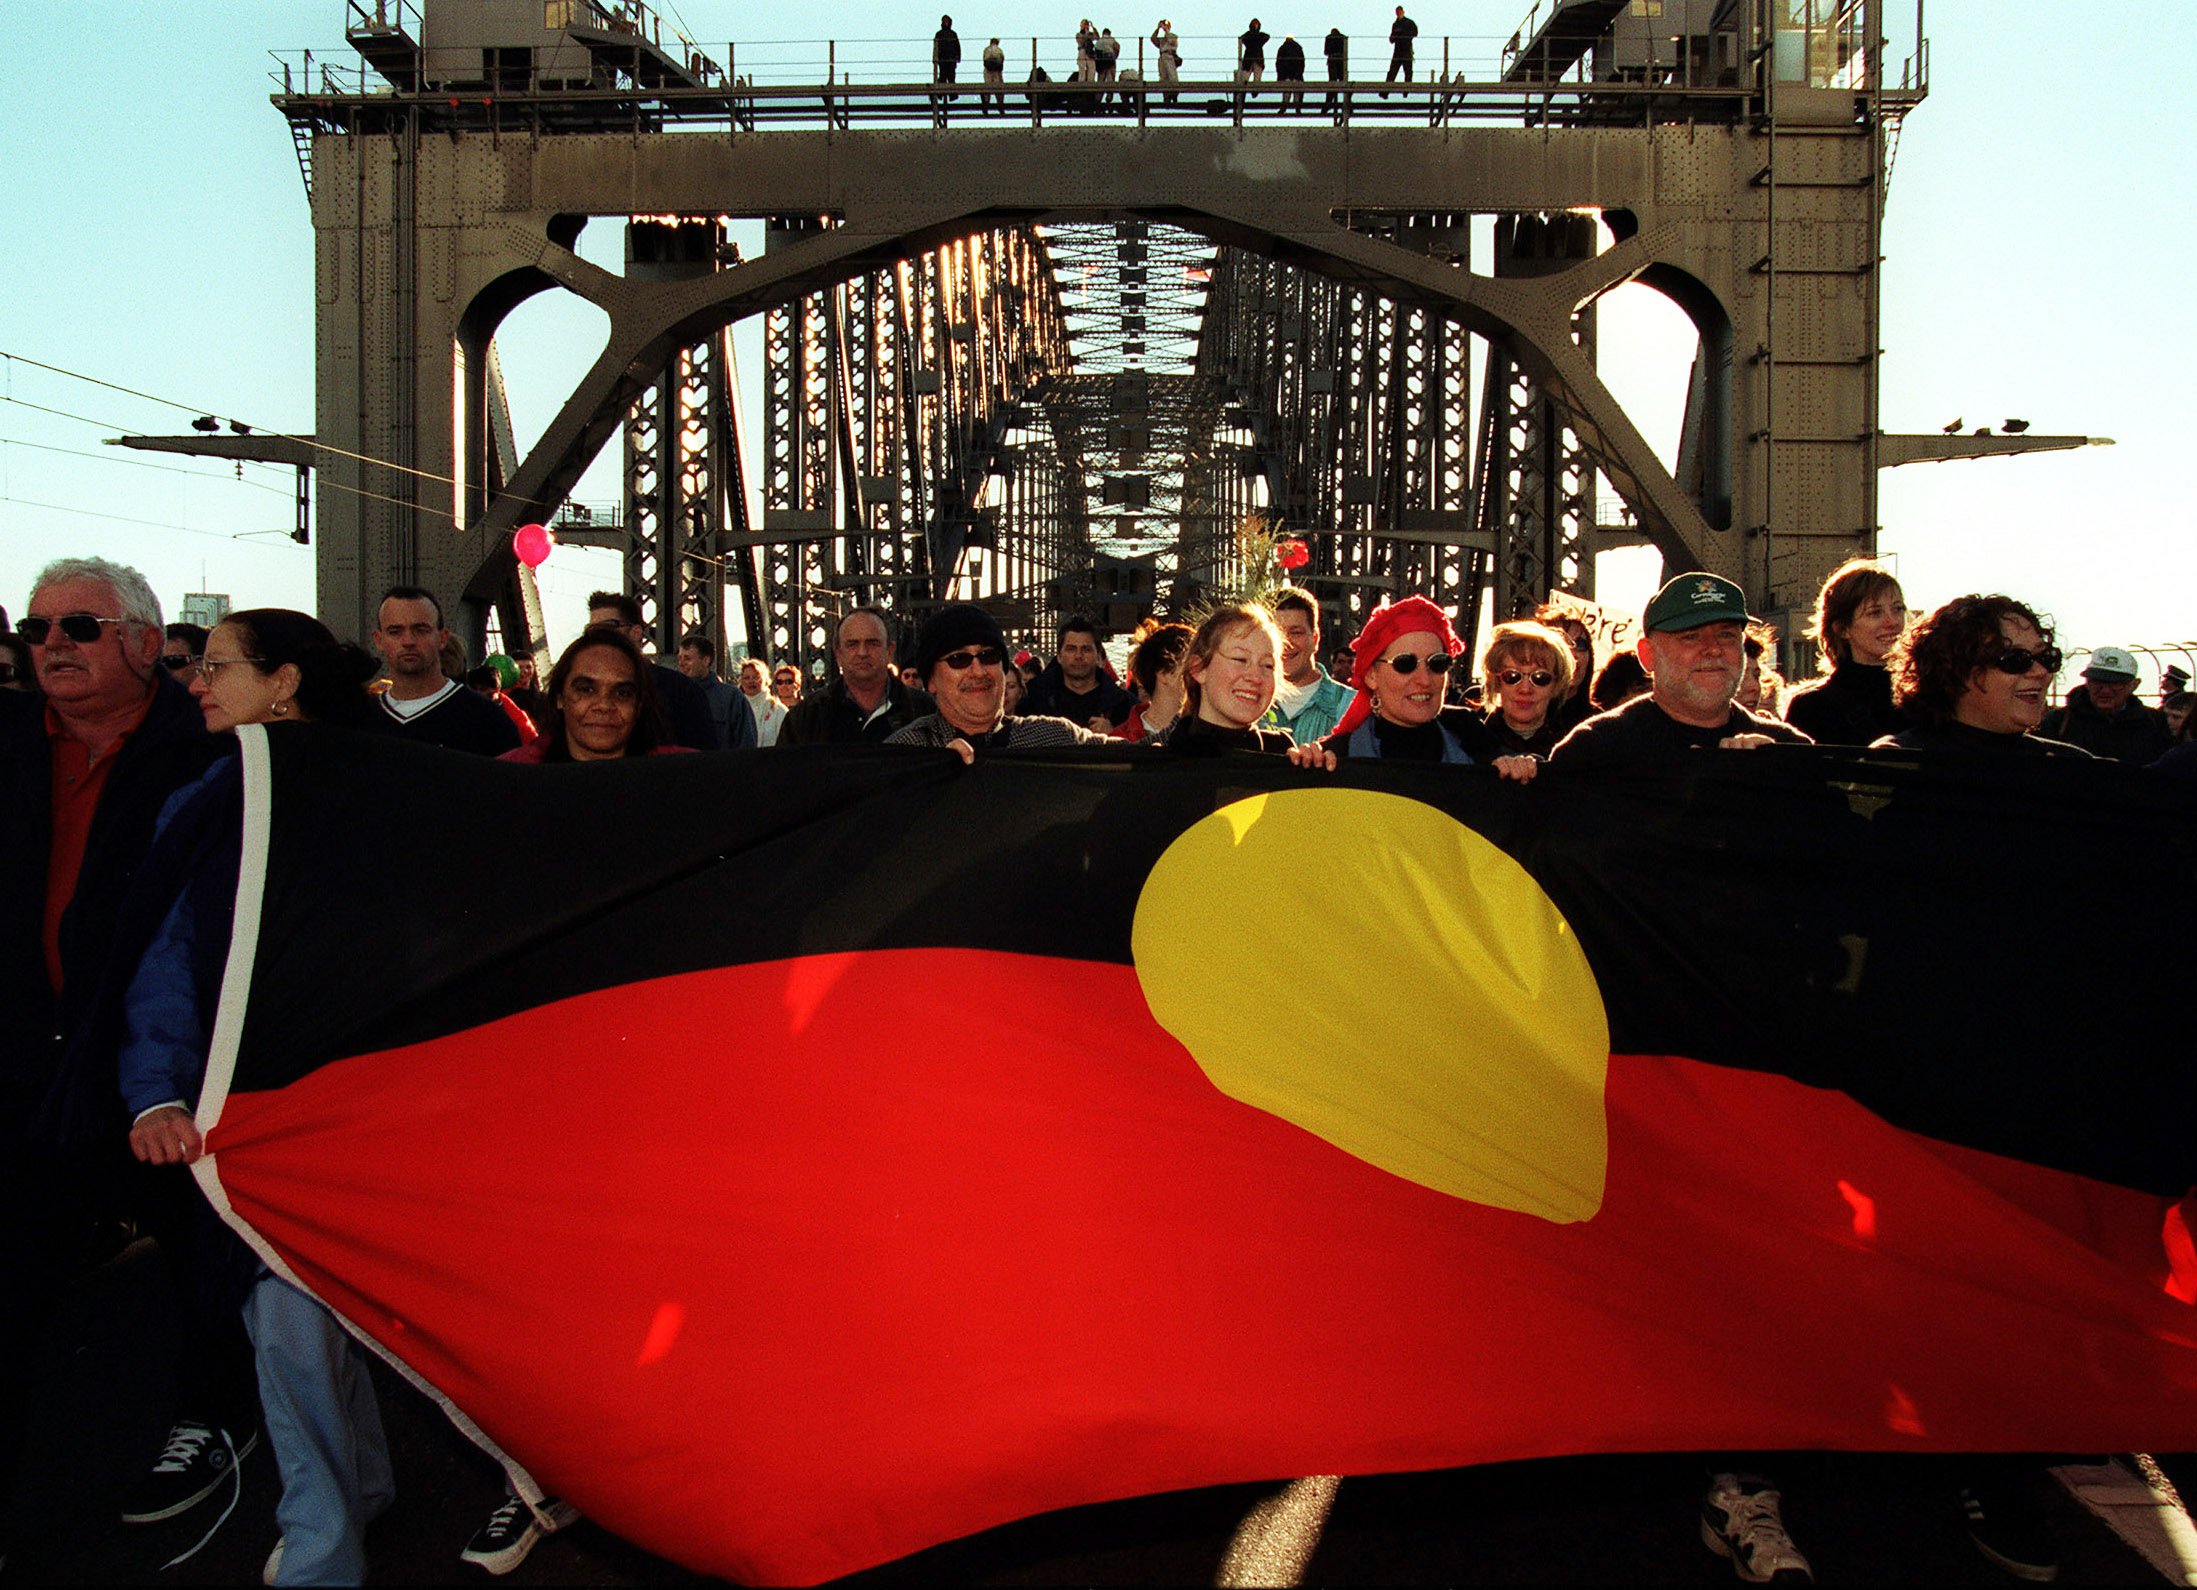 Image for article: Looking back at Australia’s largest political demonstration